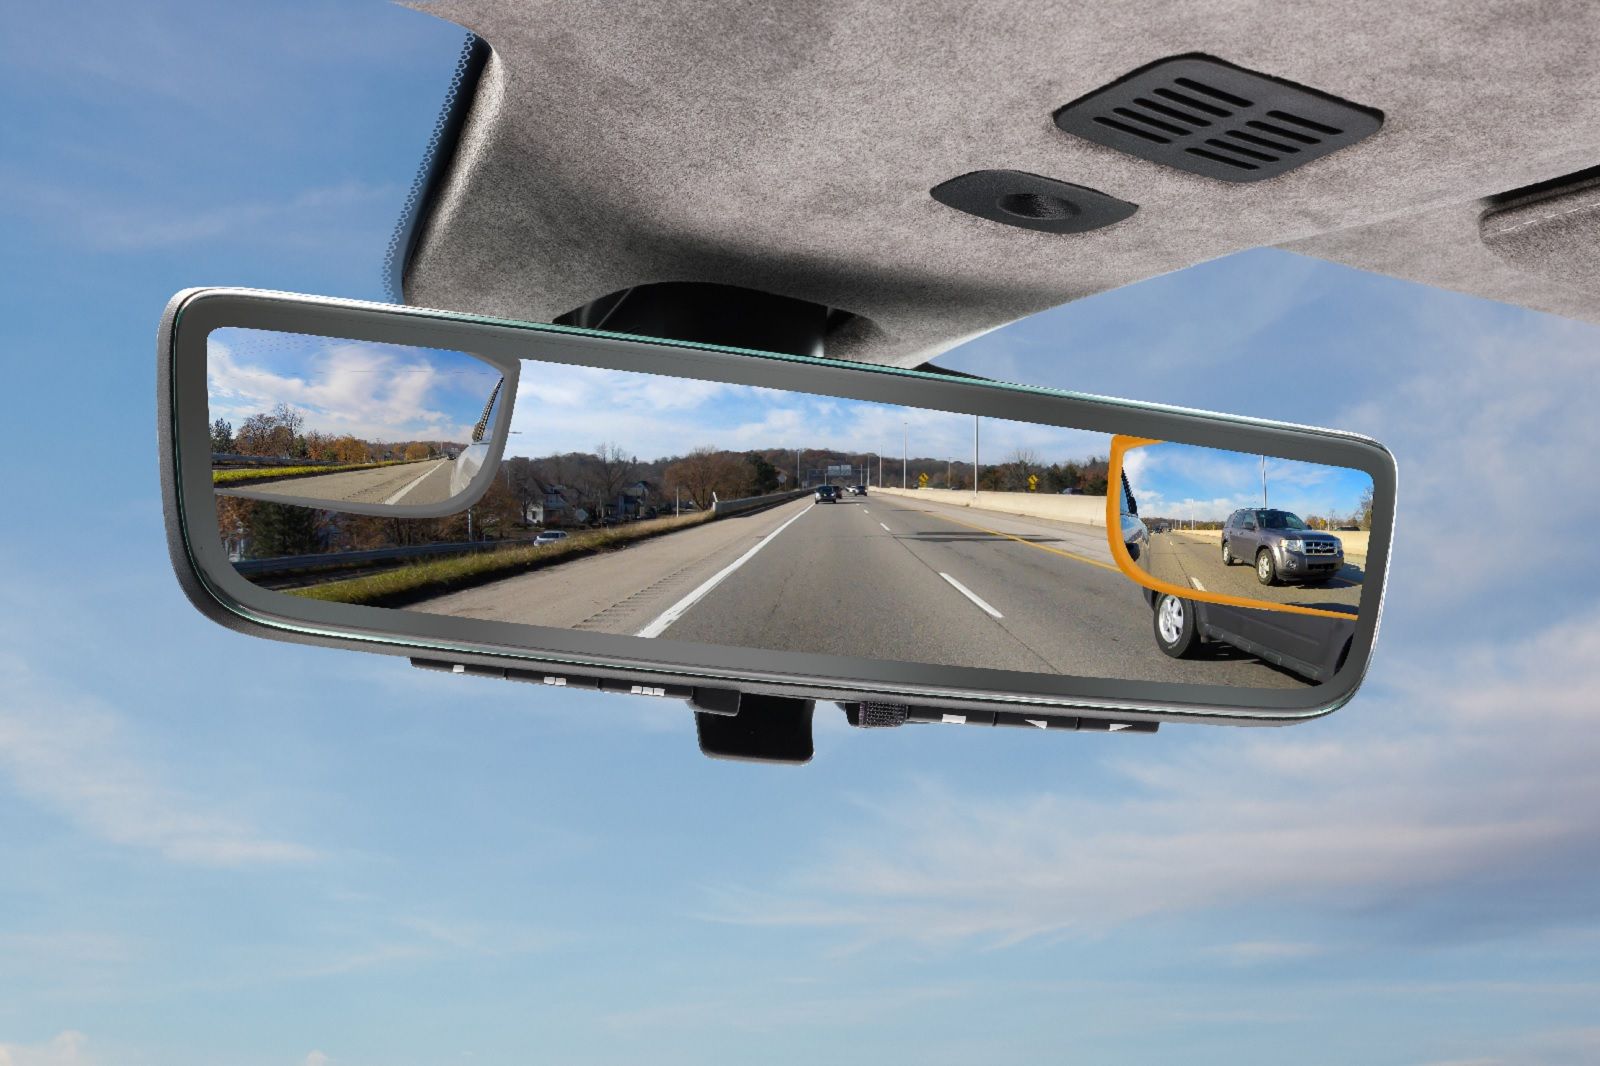 Aston Martin has a new rearview mirror with three video feeds image 1